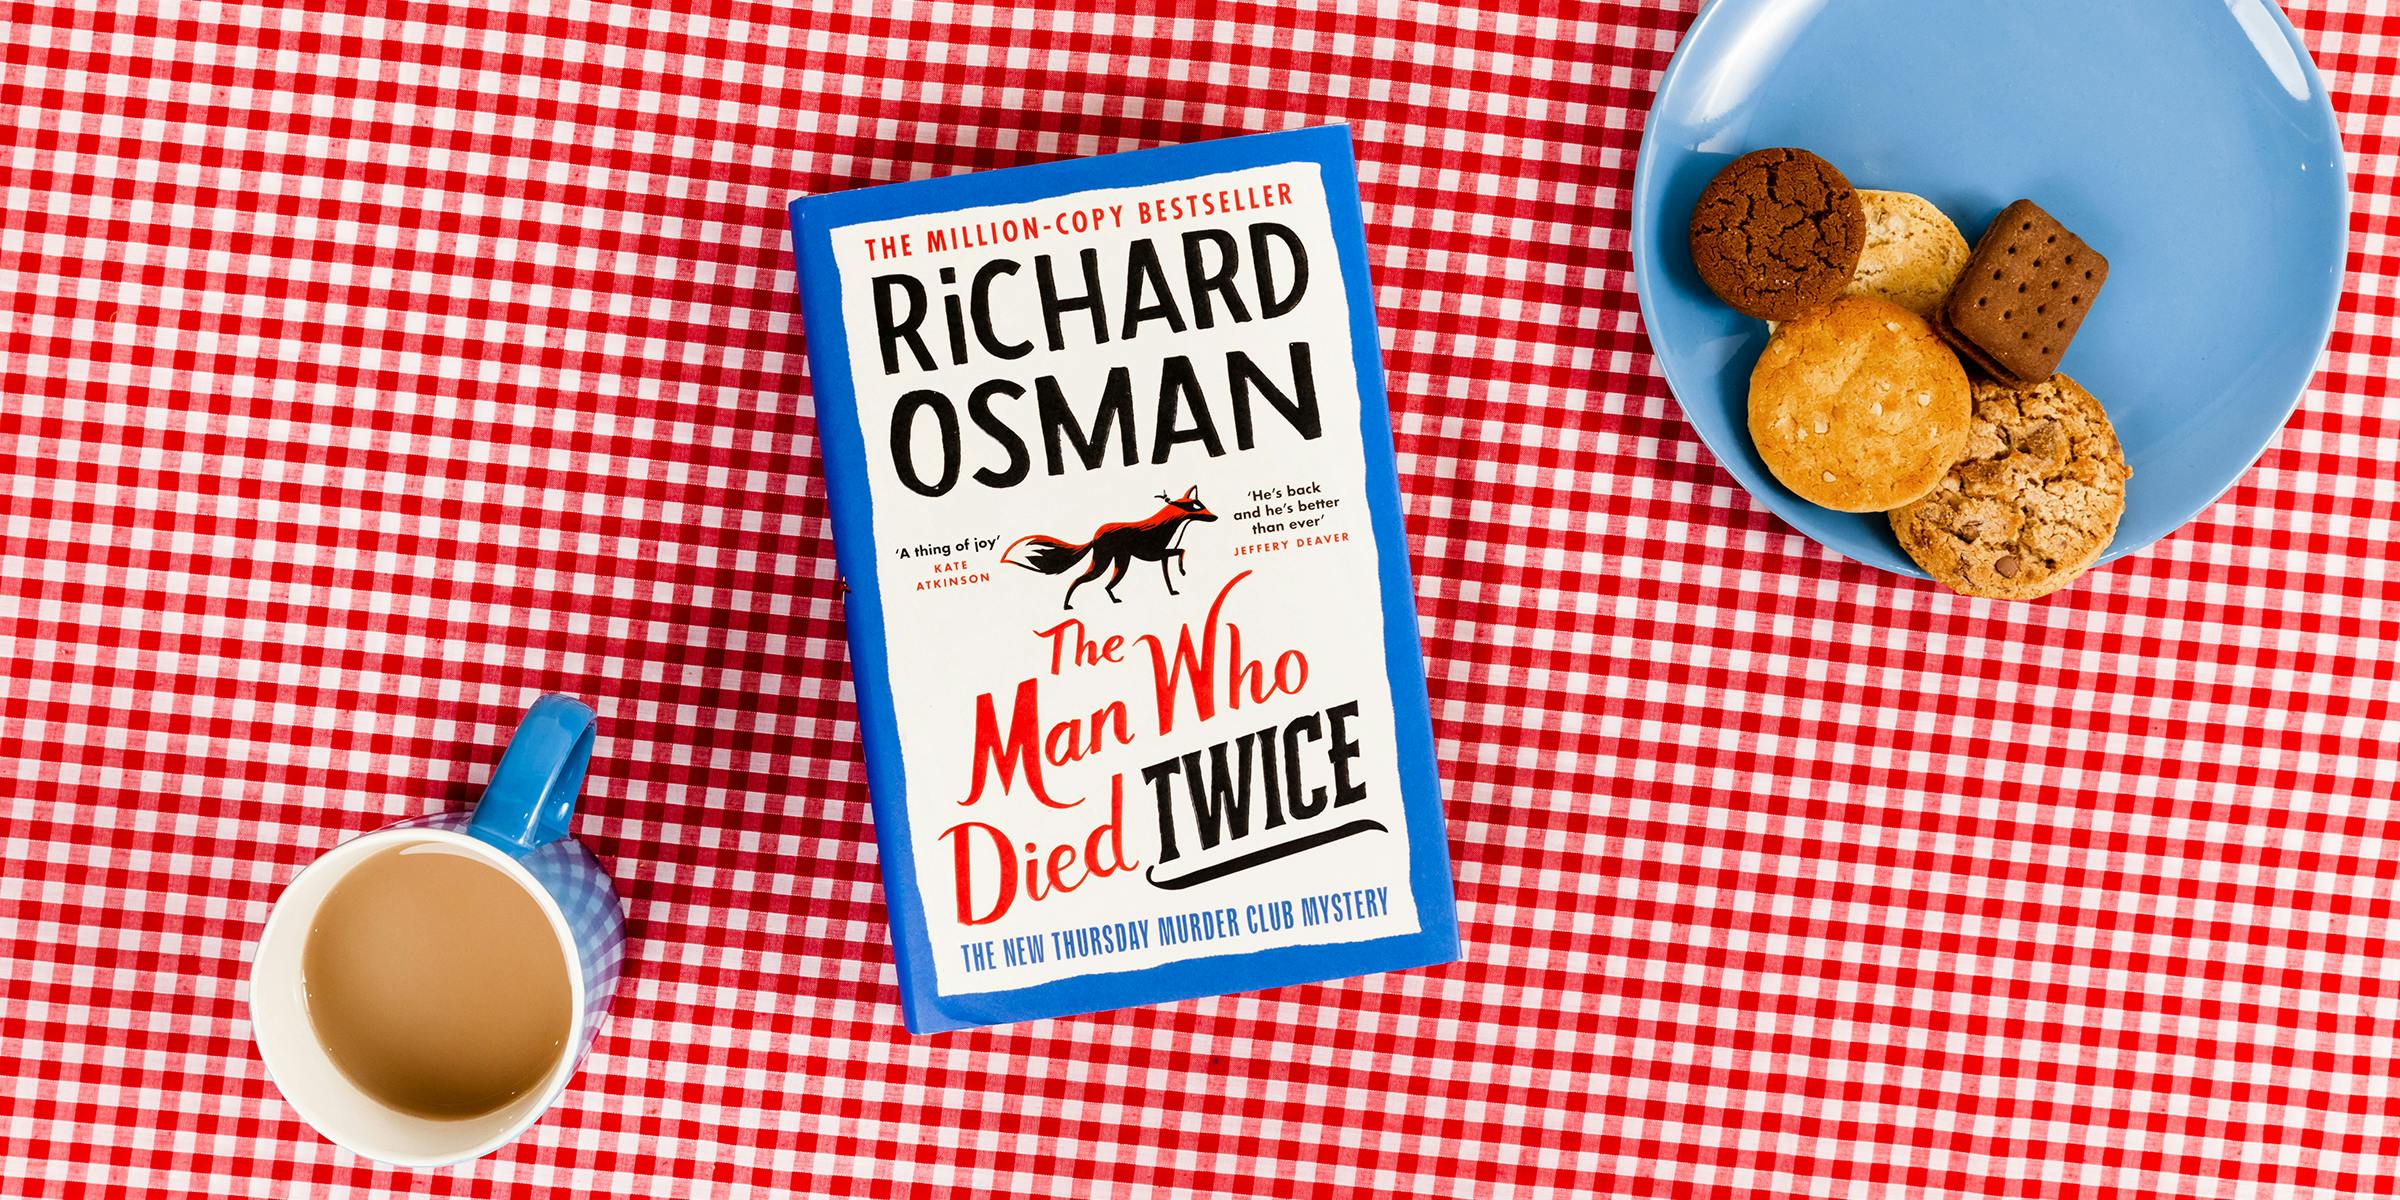 The Man Who Died Twice book club questions